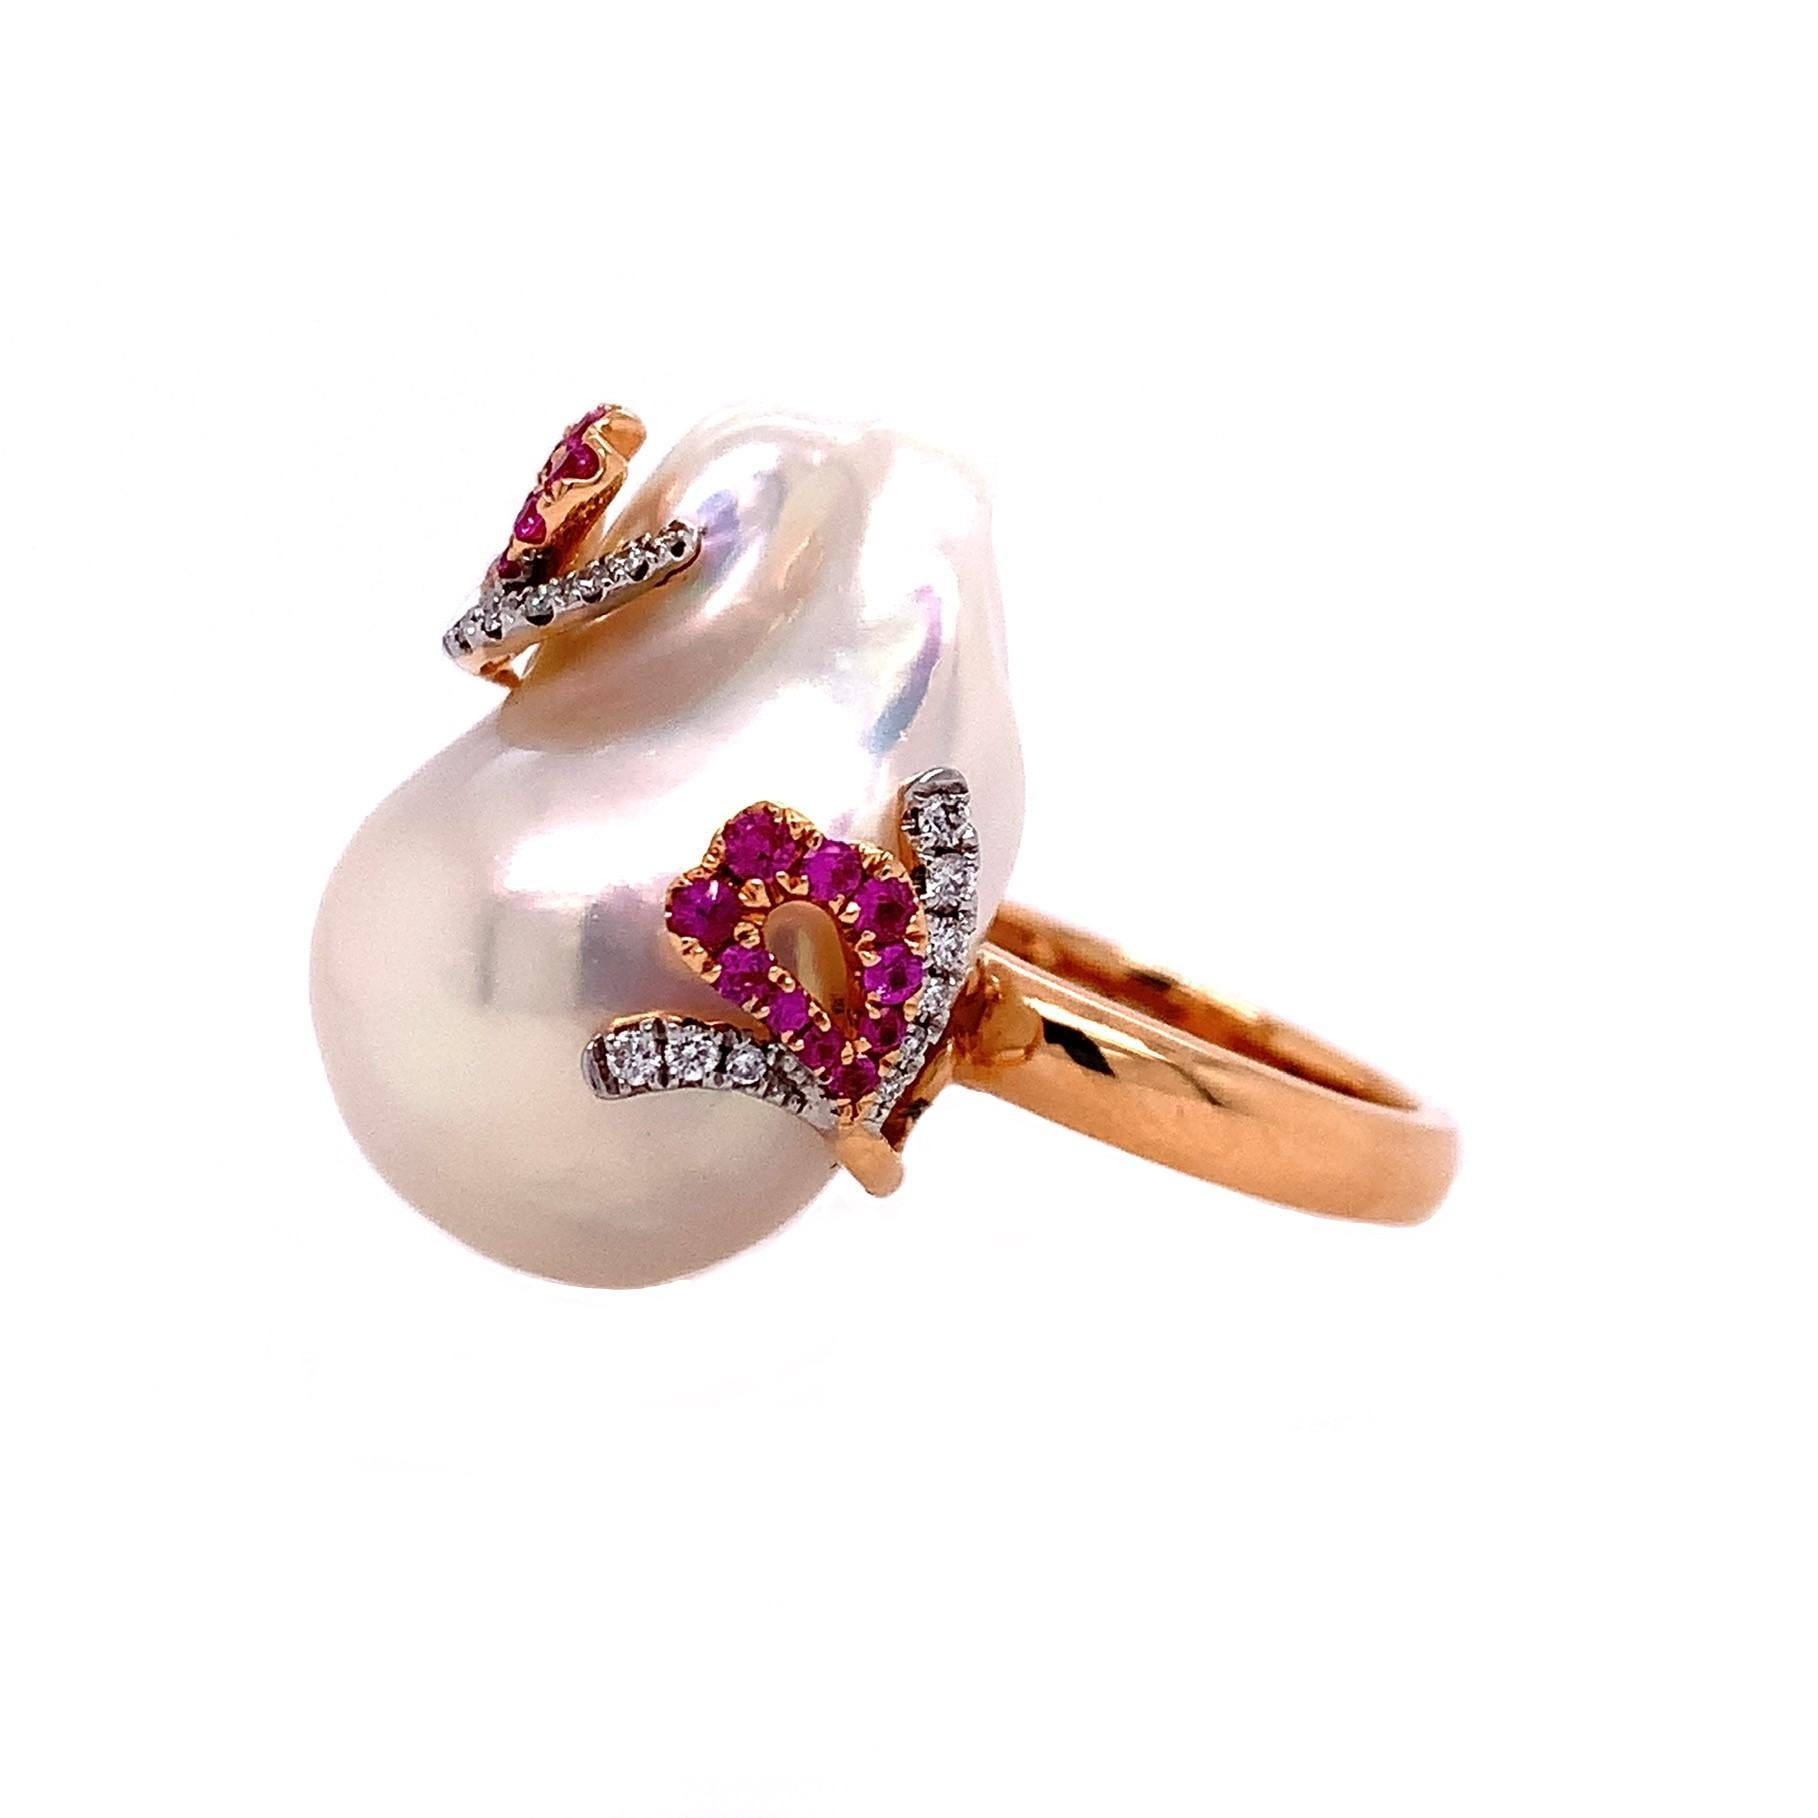 18K White Gold
Pearl: 3.87grm total weight
Pink Sapphire: 0.37ct total weight
Diamond: 0.13ct total weight.
All diamonds are G-H/SI stones.